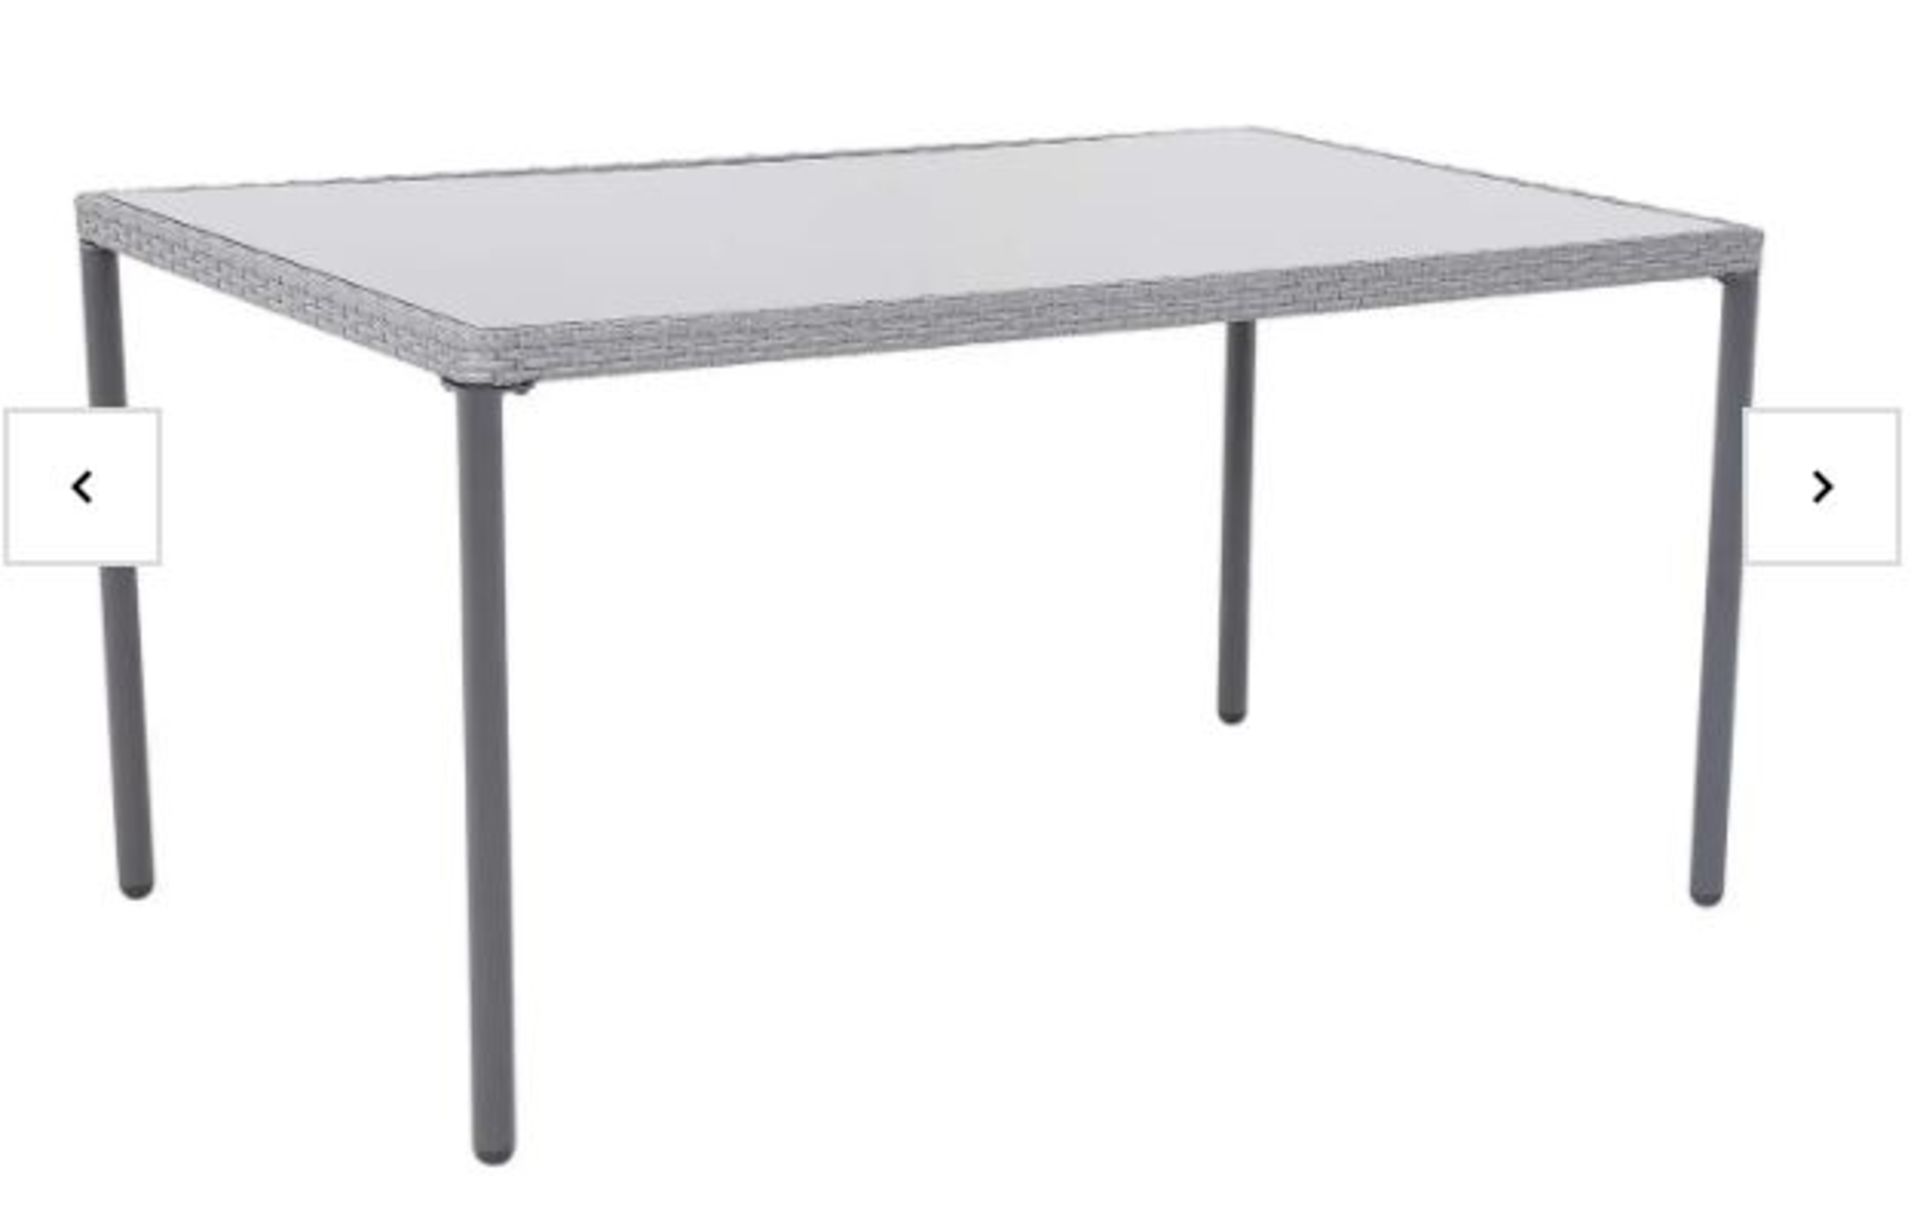 (P2) 1x Bambrick Rectangular Table. (H74x W150x D90cm). (Unsure If Fixings In Lot). - Image 2 of 3